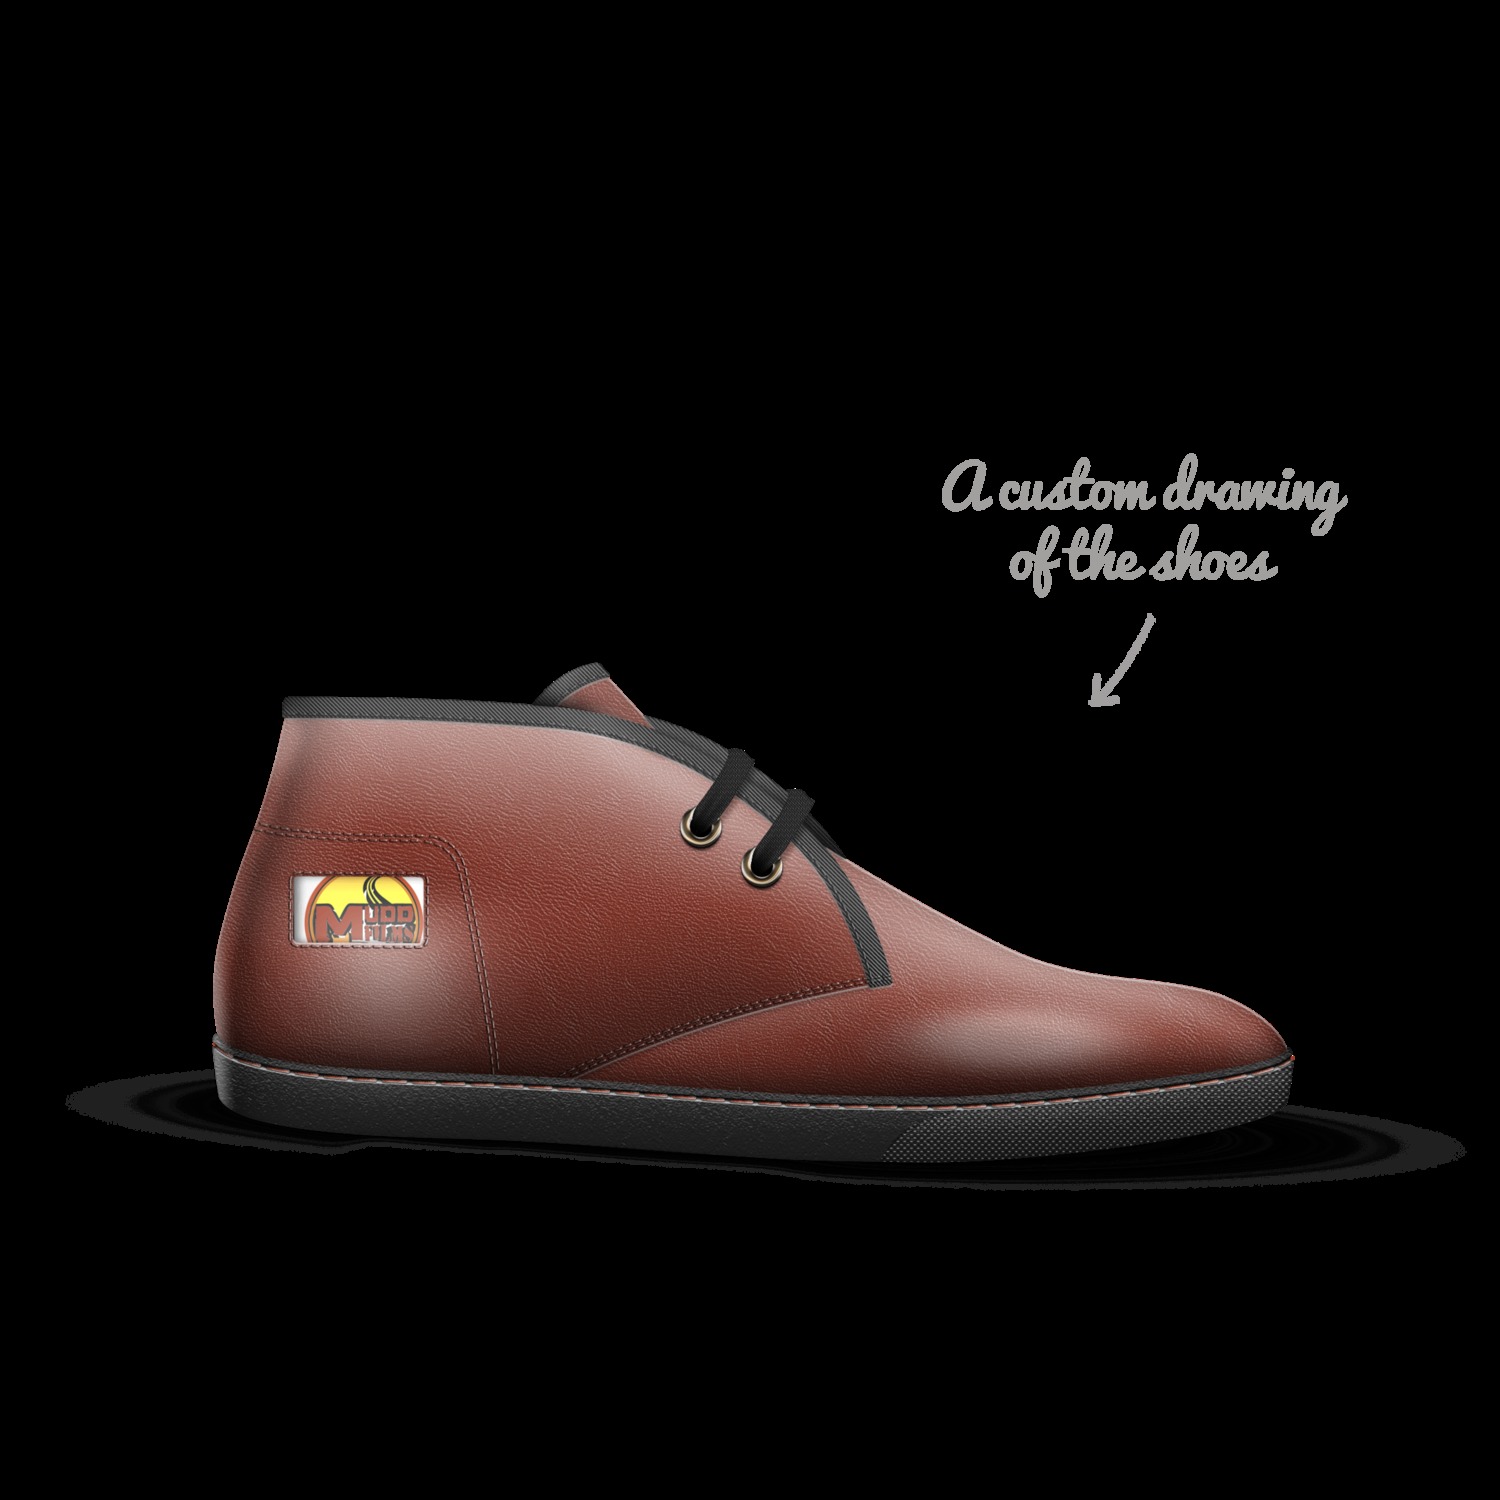 mudd shoes official website